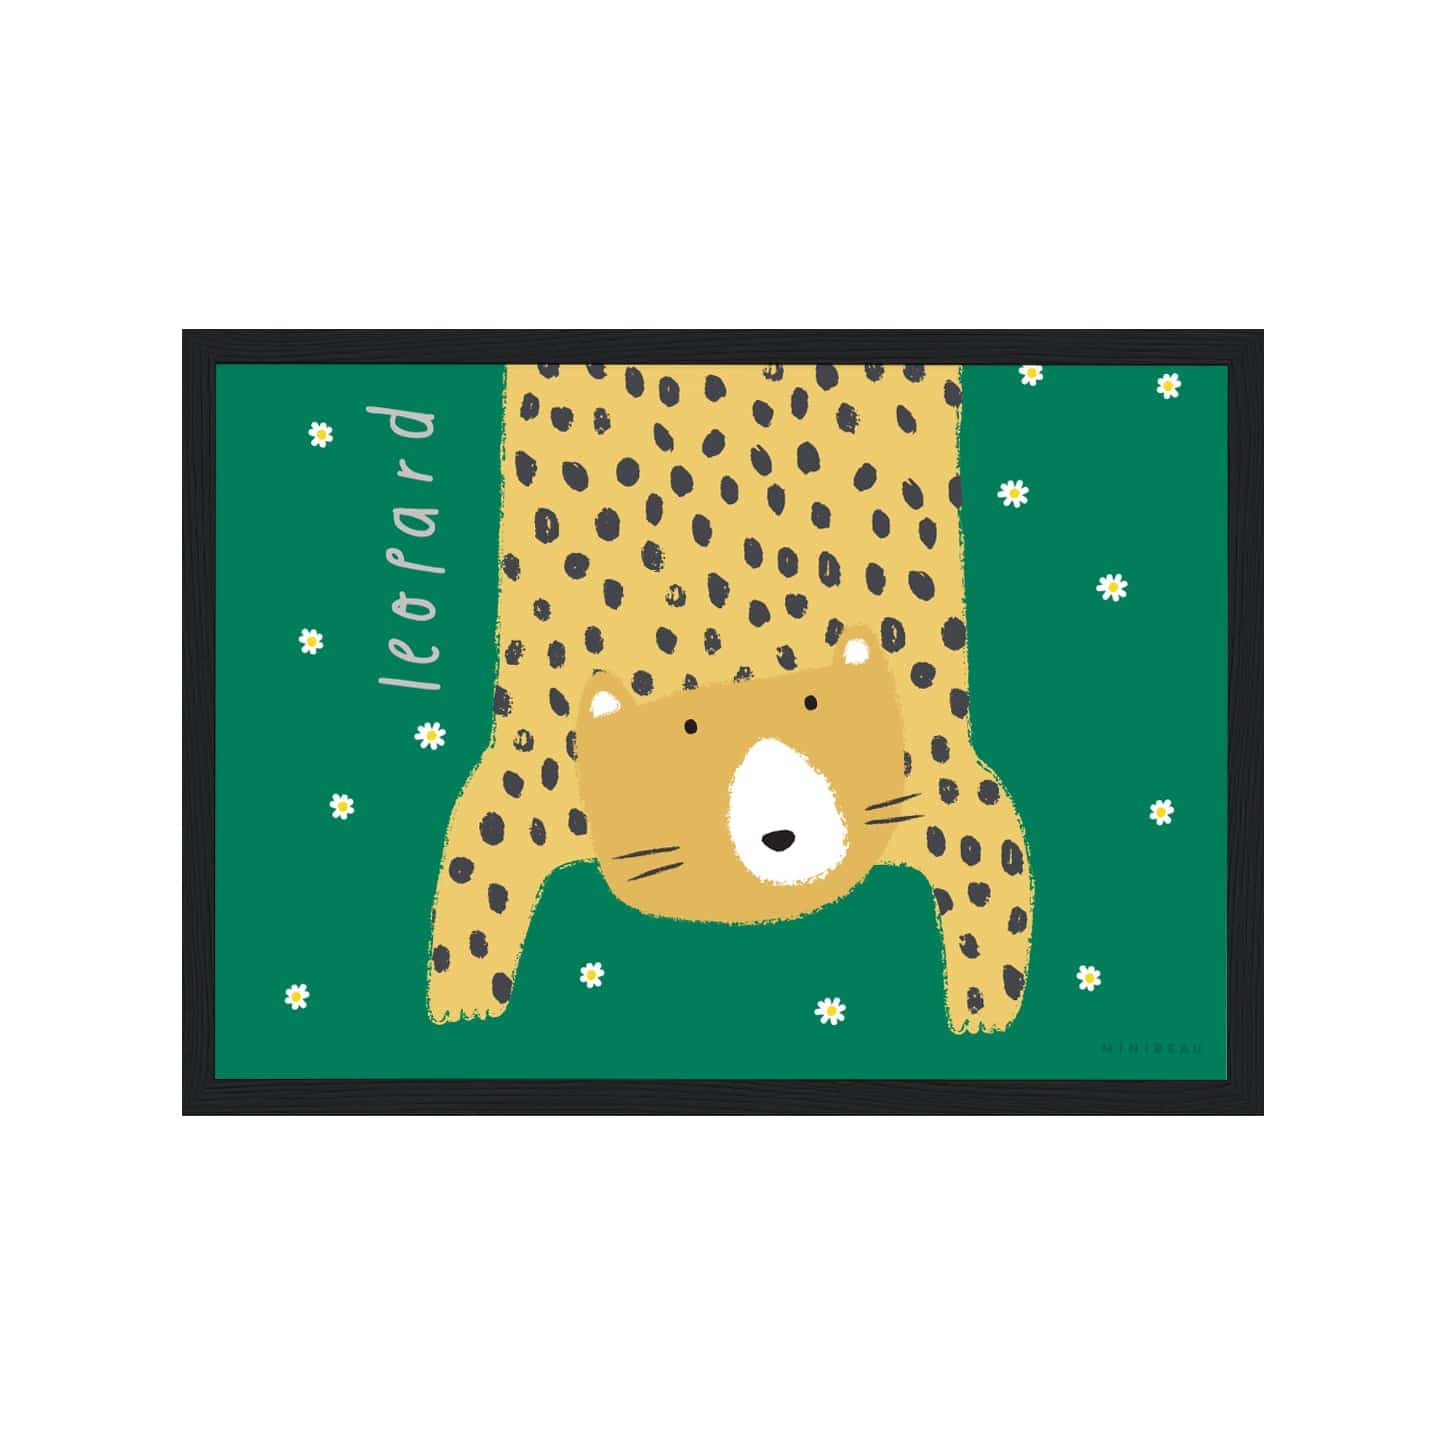 Our Leopard art print shows a hand-drawn leopard hanging down in to the picture, lifting it's head to look out at us on a green background with falling daisies, with the word leopard written alongside it, in a black wooden frame